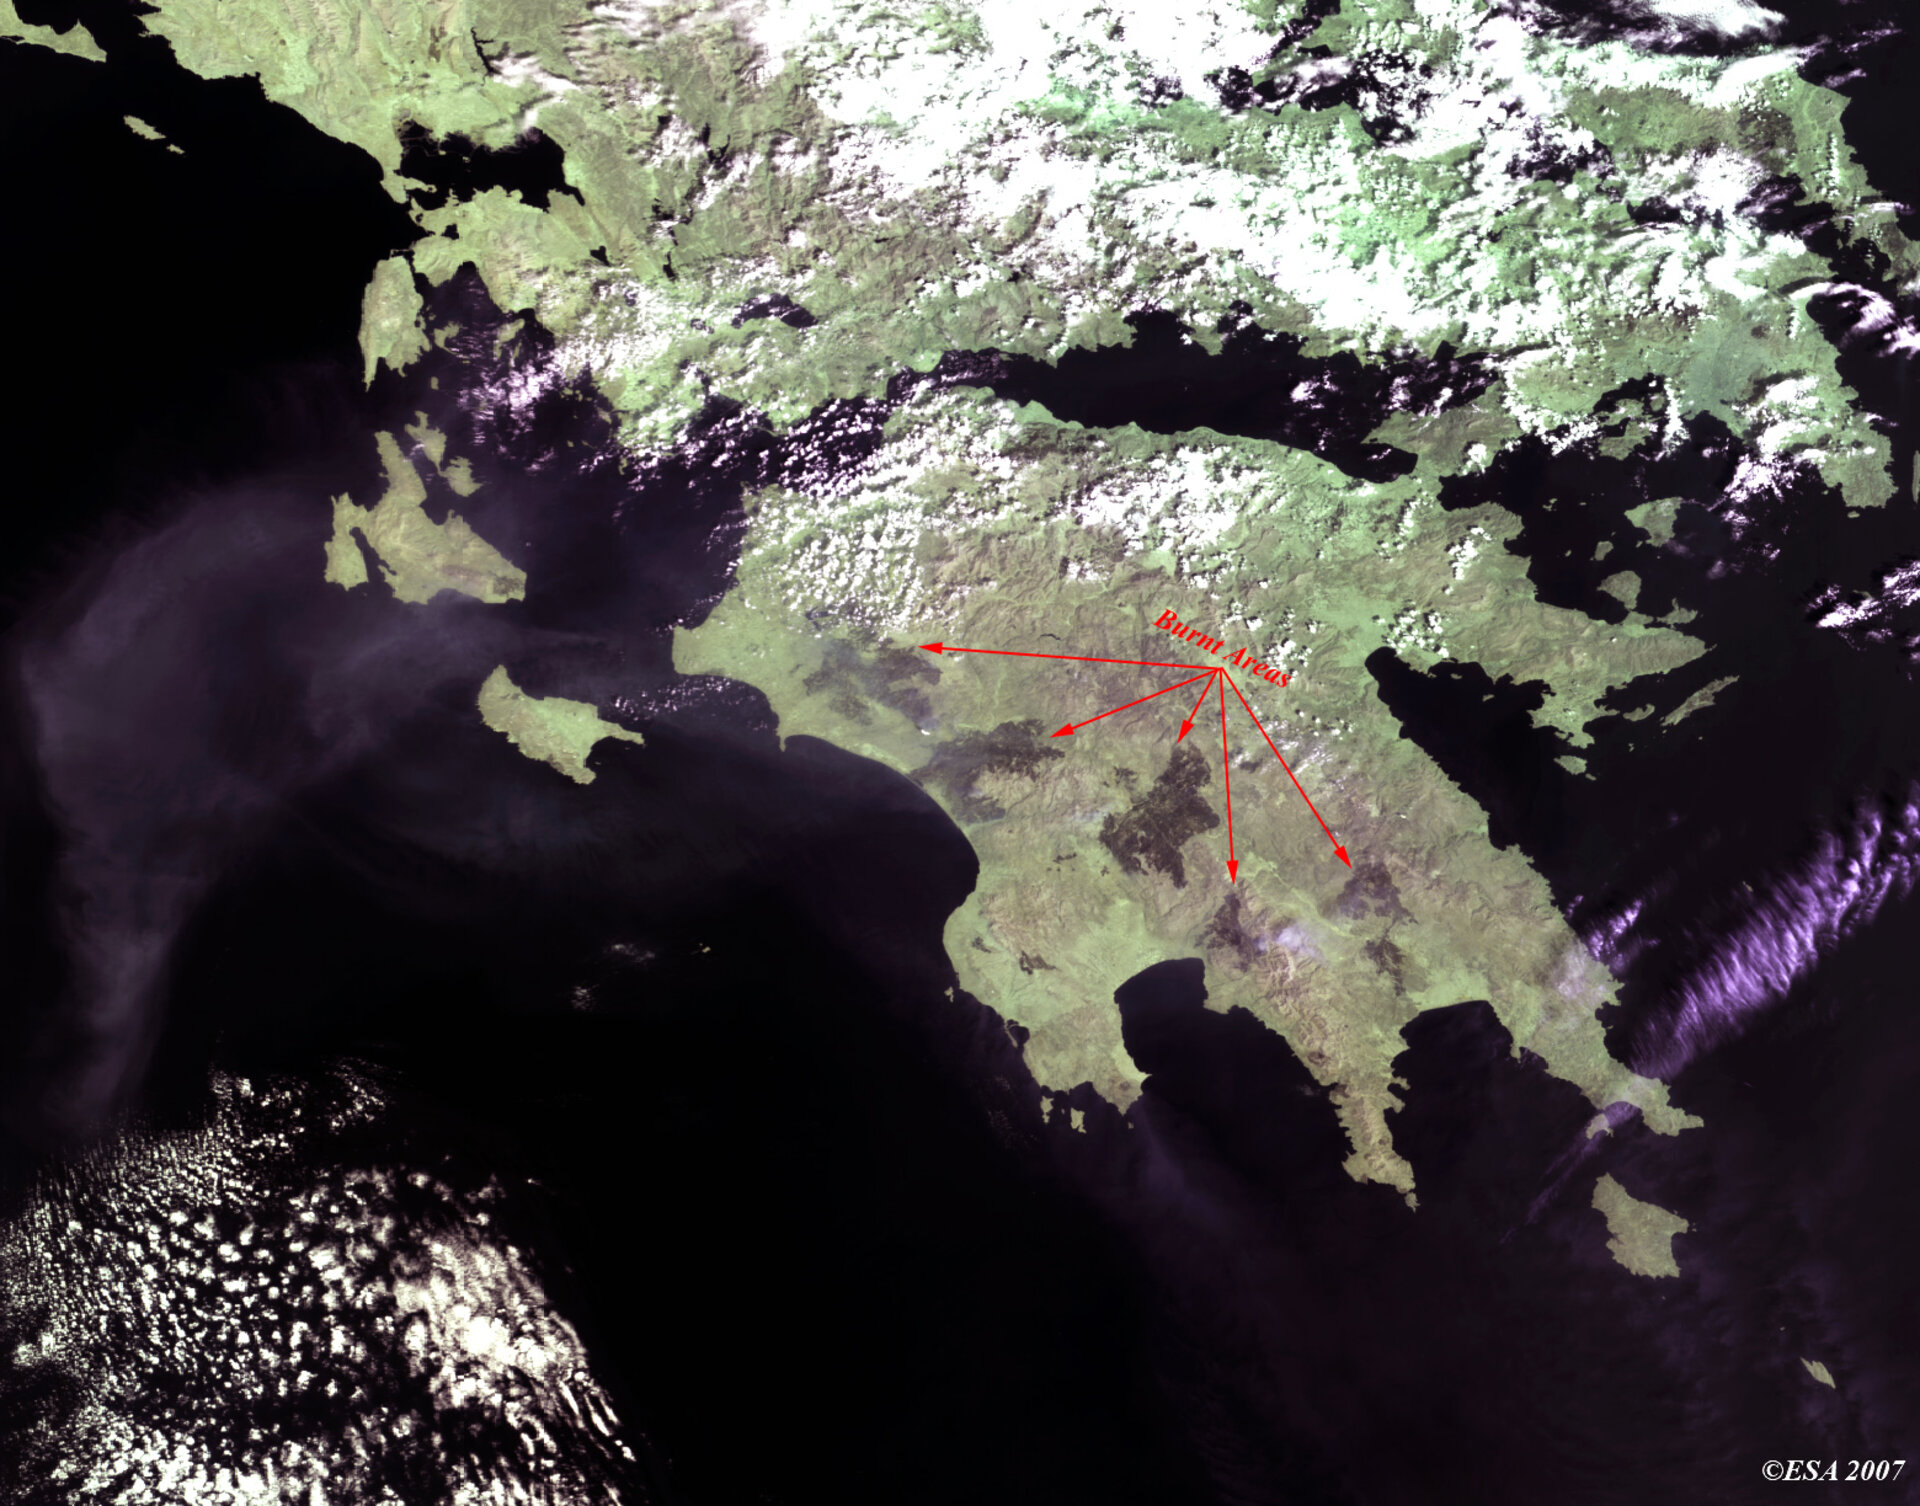 Burnt areas in Greece